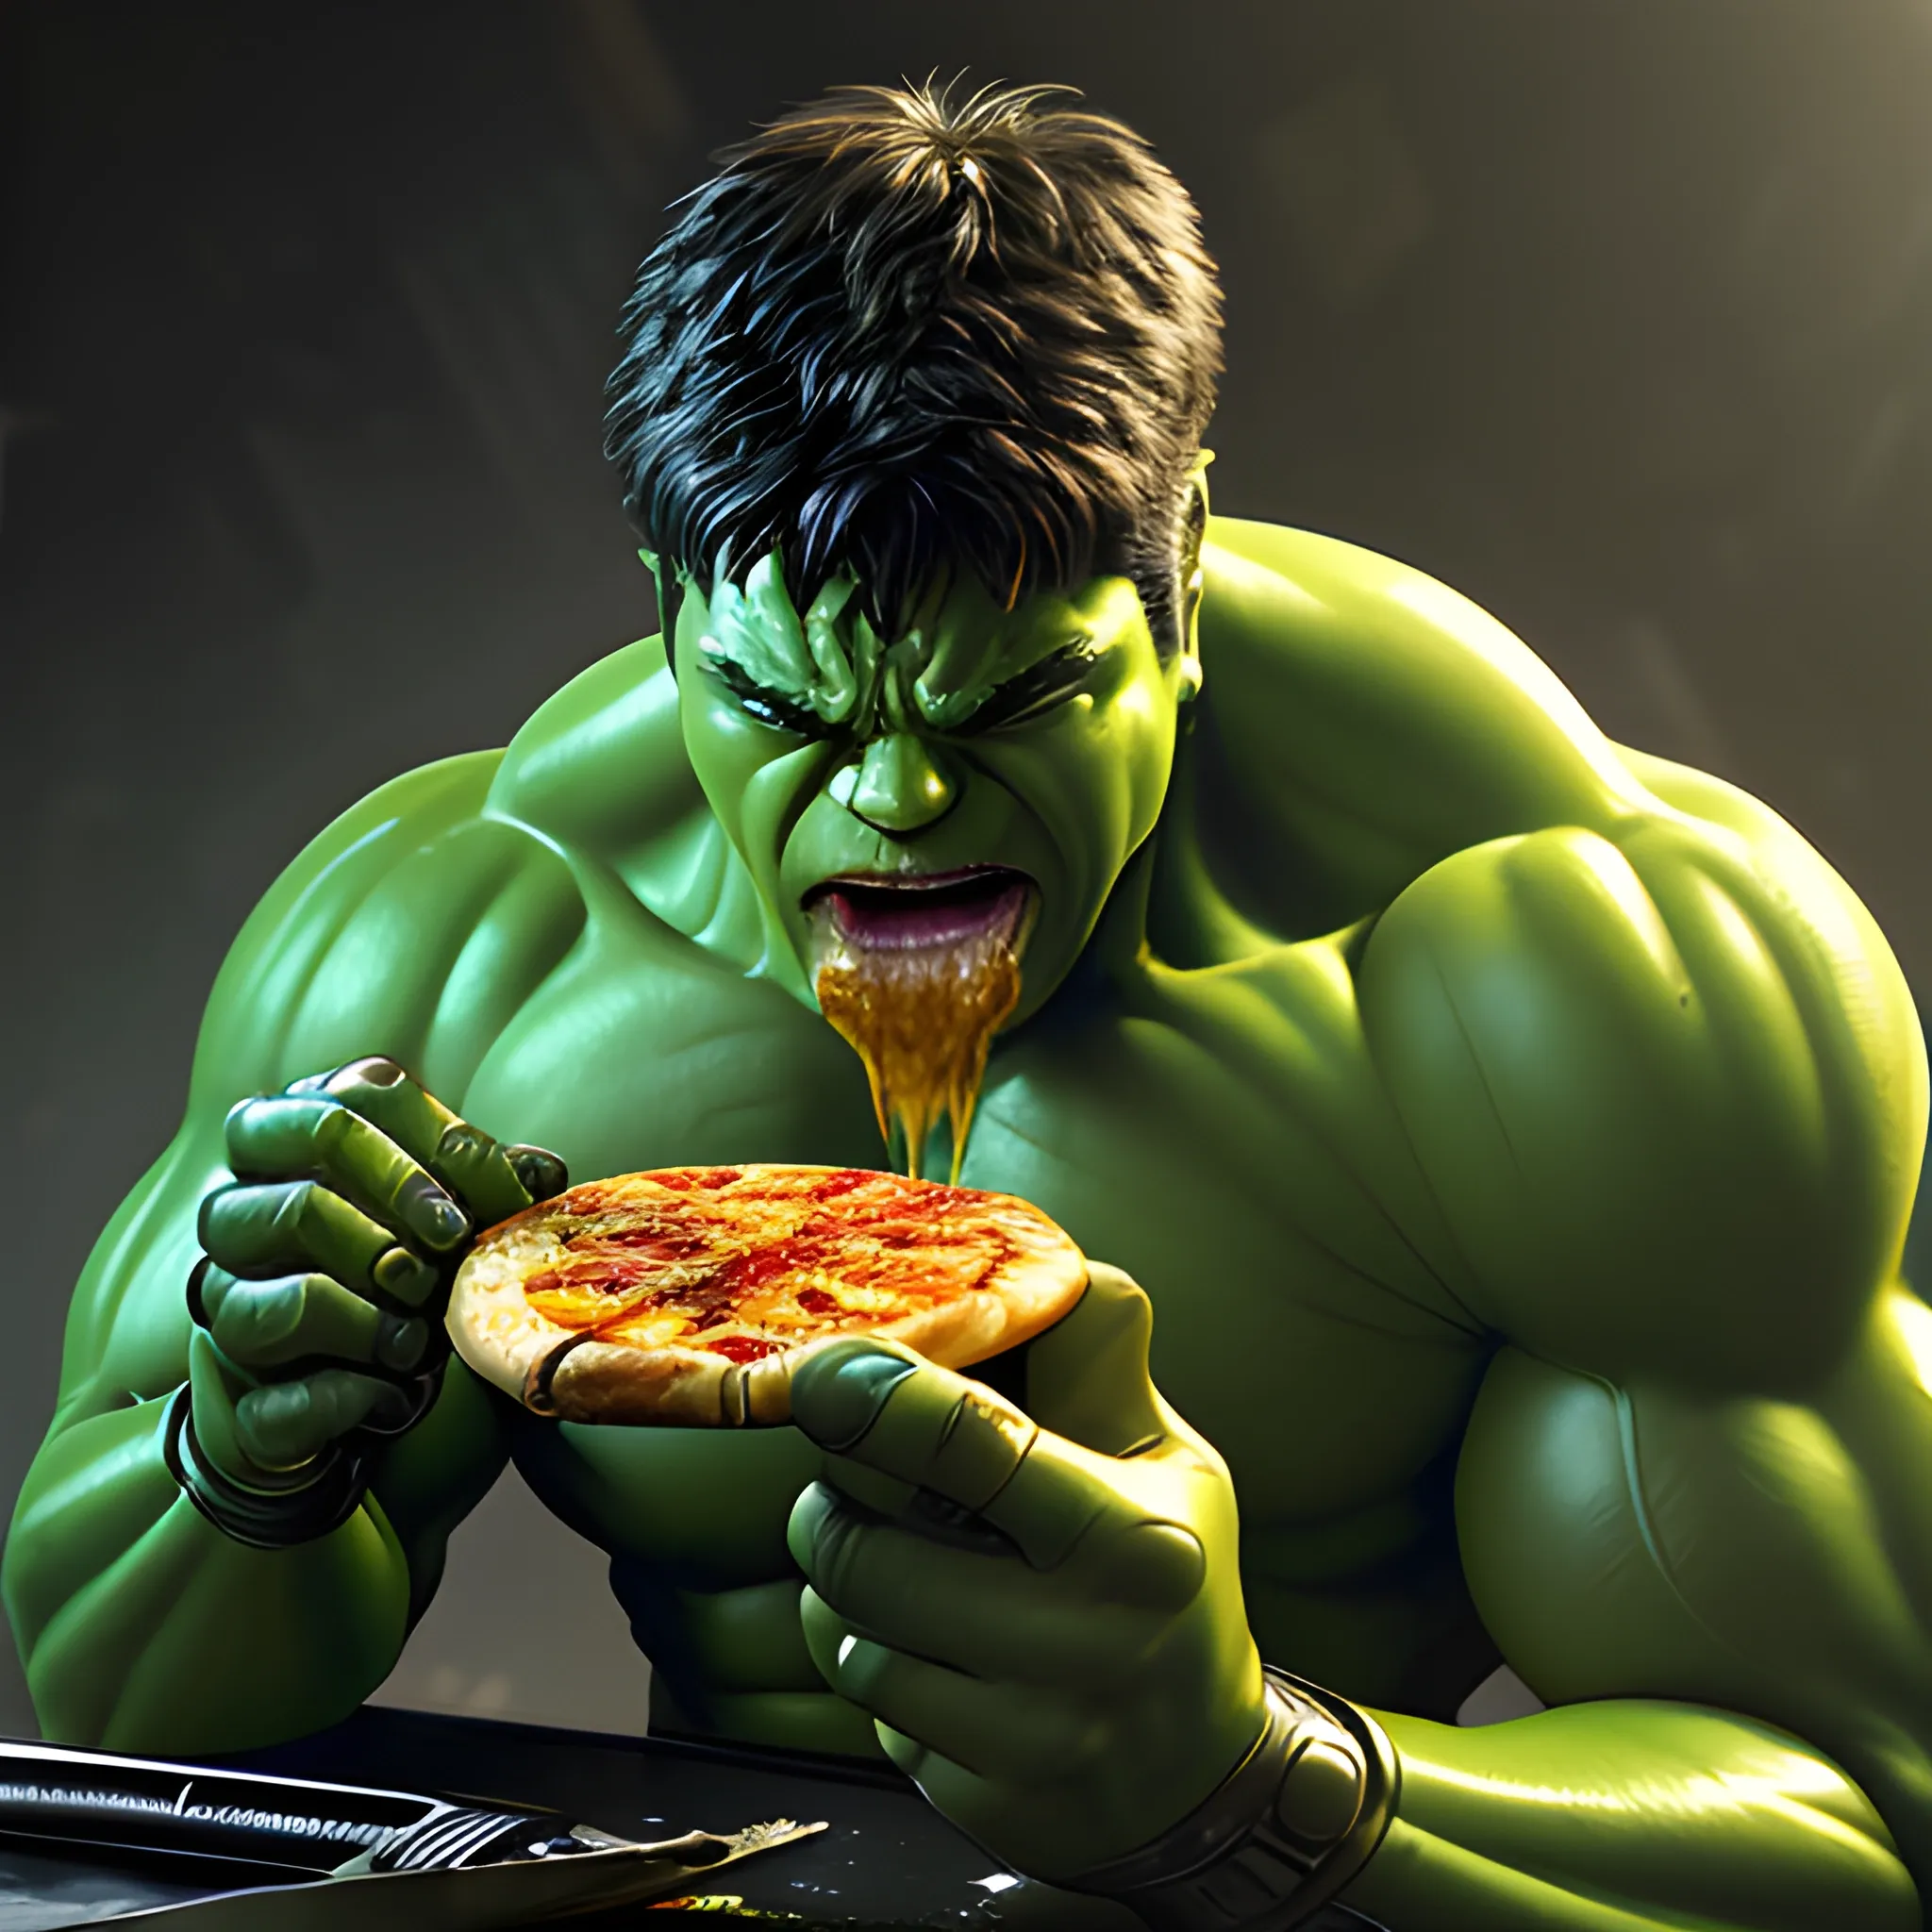 Hulk, with subtle cybernetic enhancements, eating a slice of pizza with dripping melted cheese. The image should be hyper-realistic, illuminated with soft studio lighting and edge highlights. The background should be beautifully detailed, drawing inspiration from a luxurious cyberpunk setting, reminiscent of Robocop. Ensure the image is in 4k resolution.